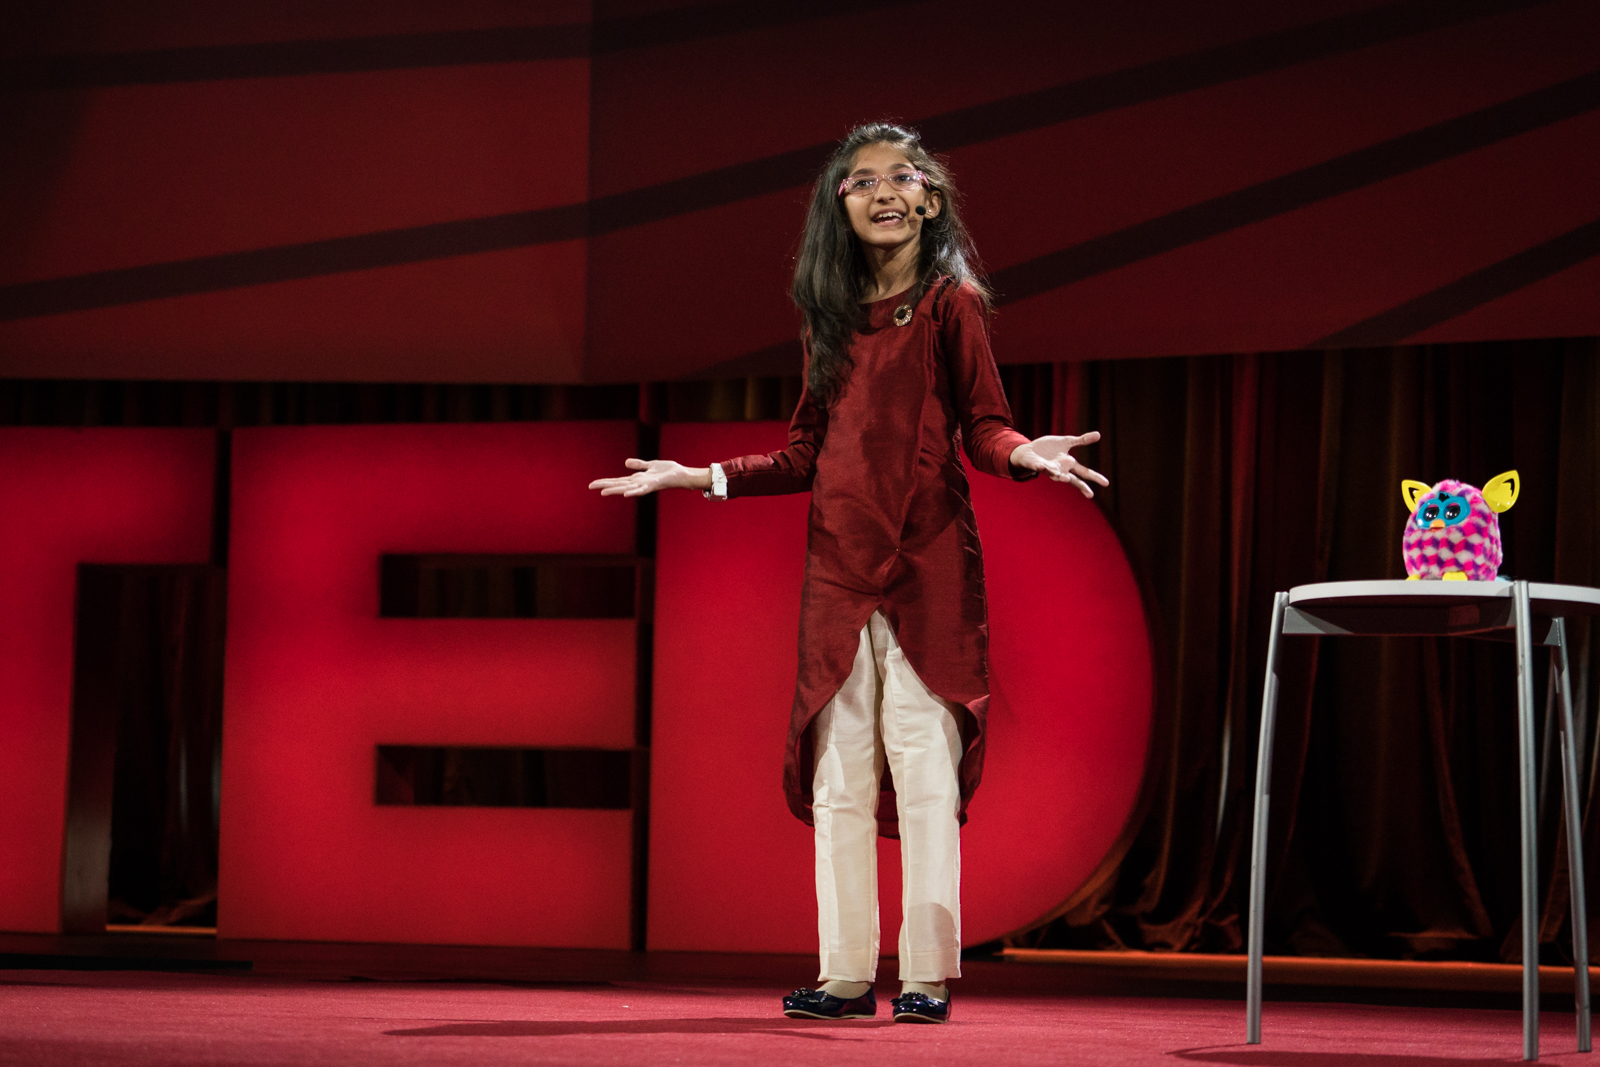 Ishita Katyal speaks at TED2016 - Dream, February 15-19, 2016, Vancouver Convention Center, Vancouver, Canada. Photo: Bret Hartman / TED